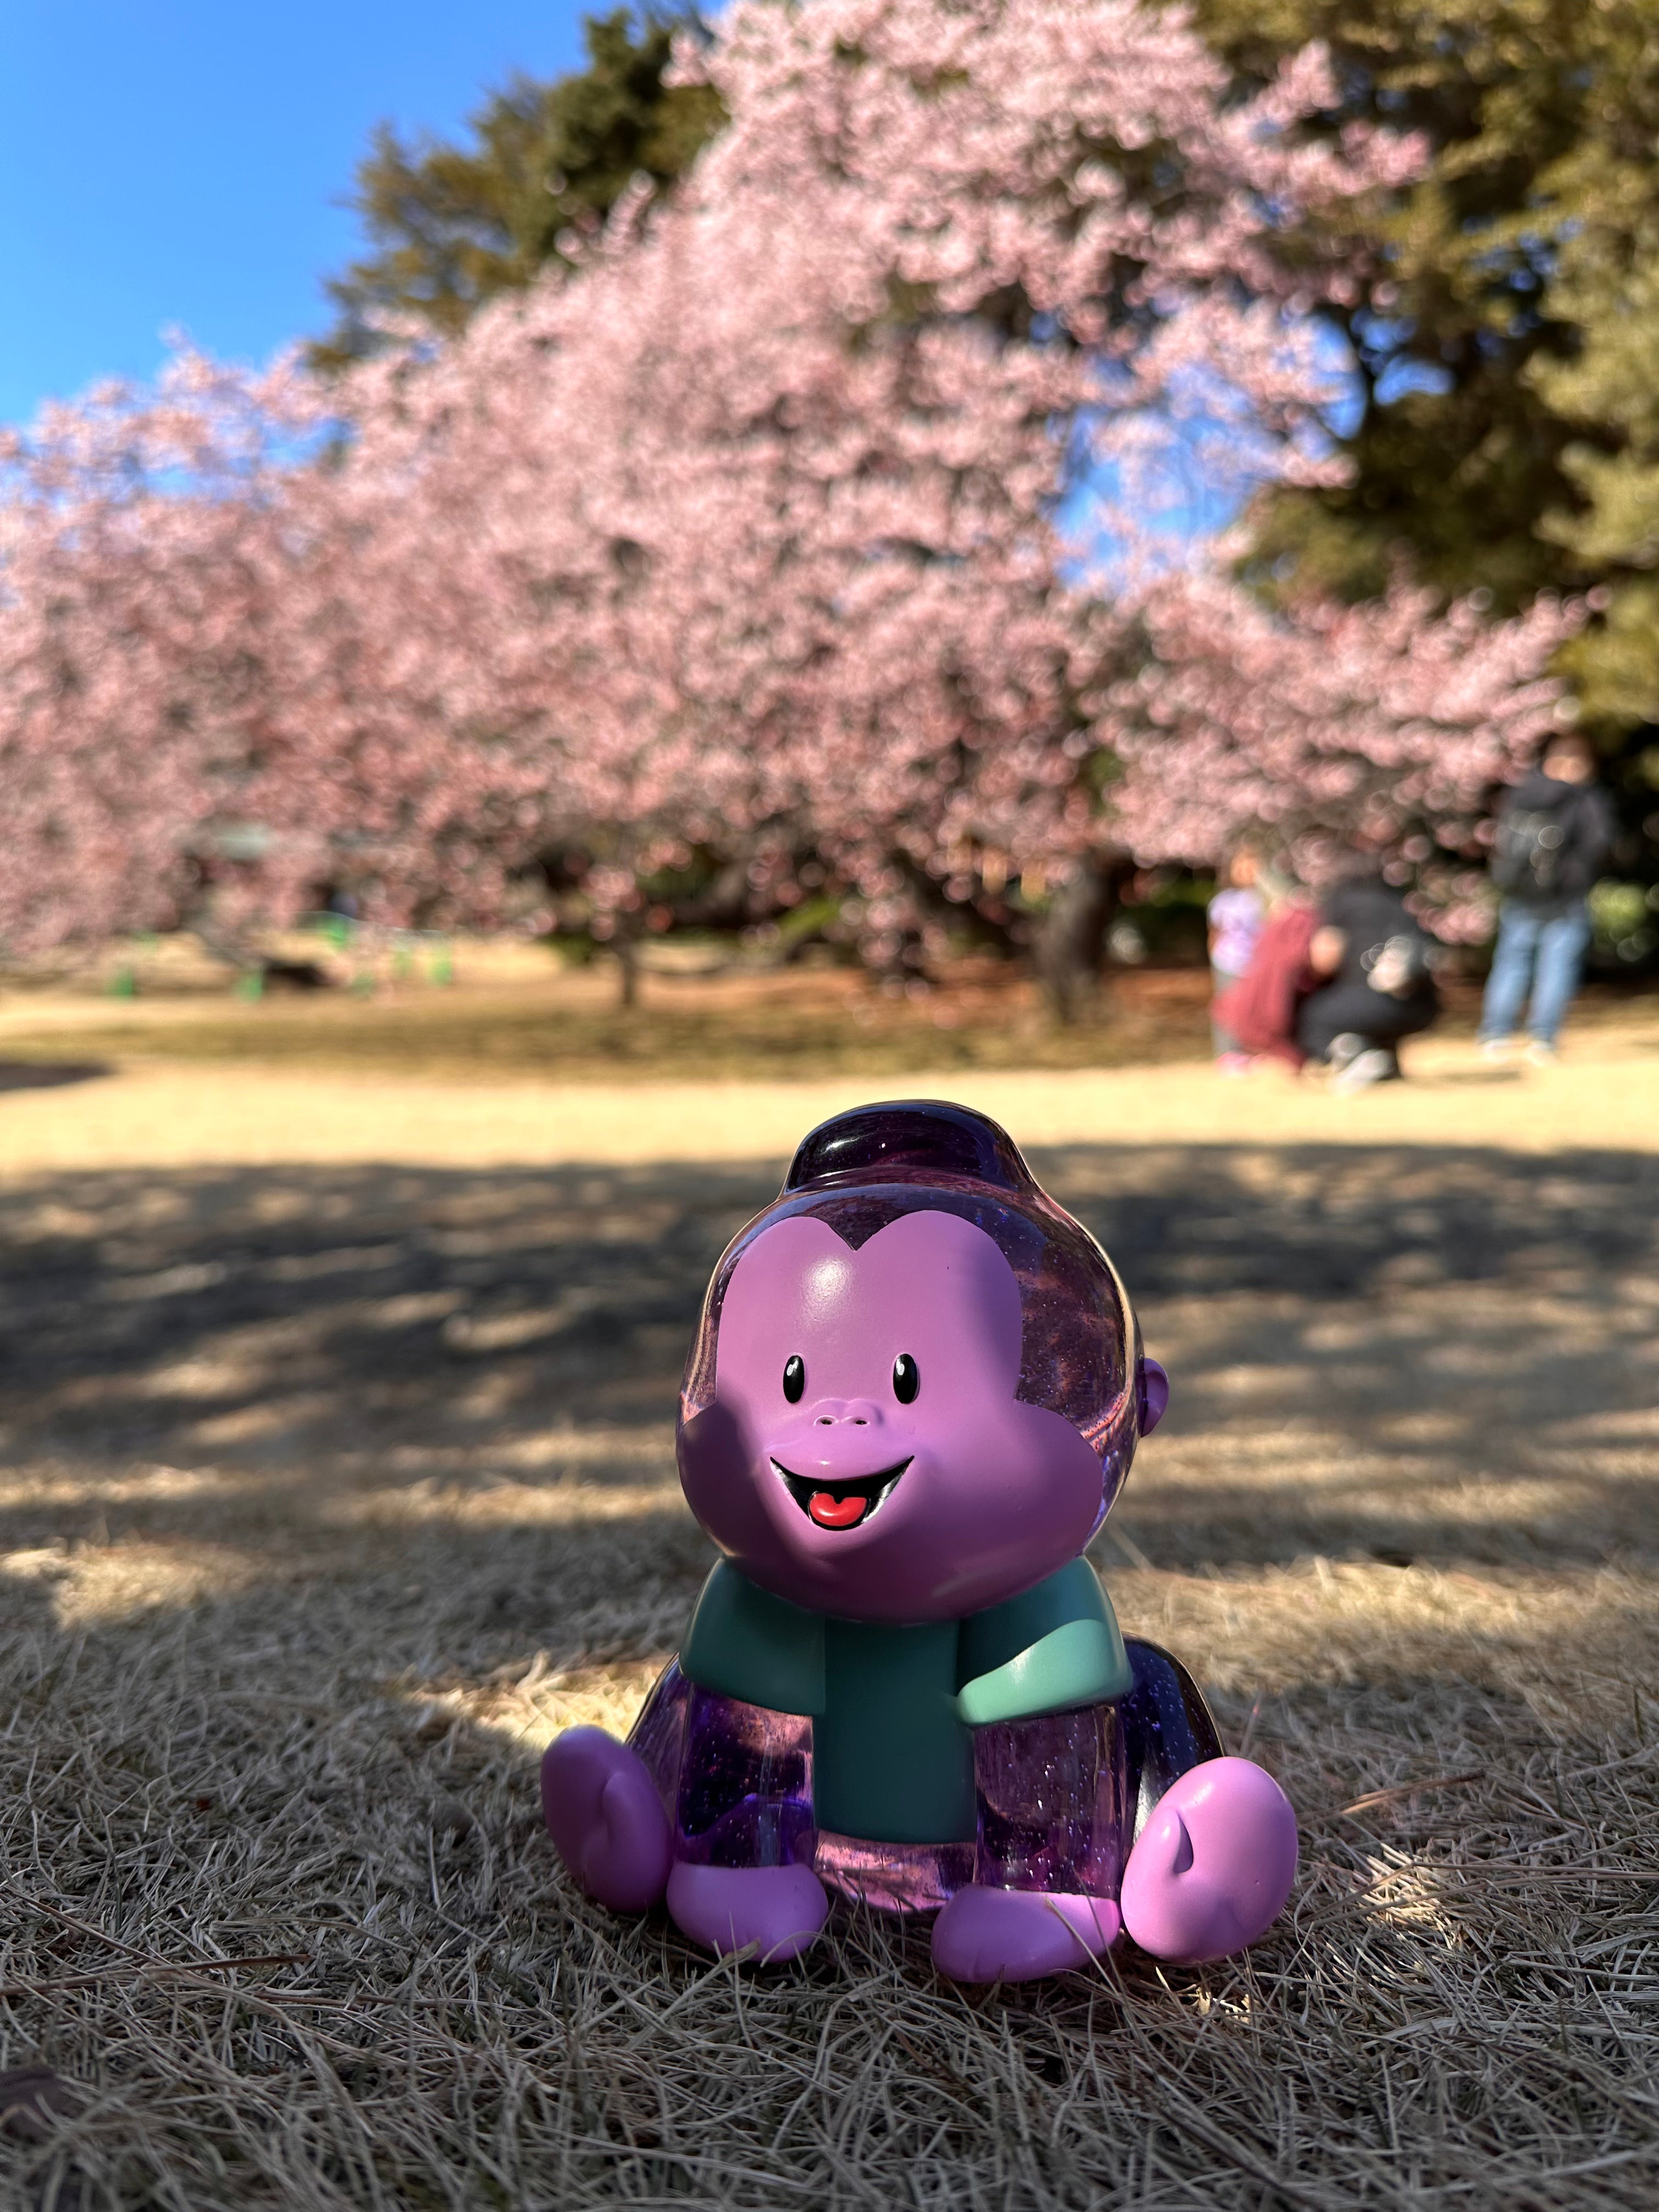 Arlo by Prime purple toy monkey figurine, 5 inches tall, made of high grade resin, limited to 50pcs, outdoor setting with tree and grass.